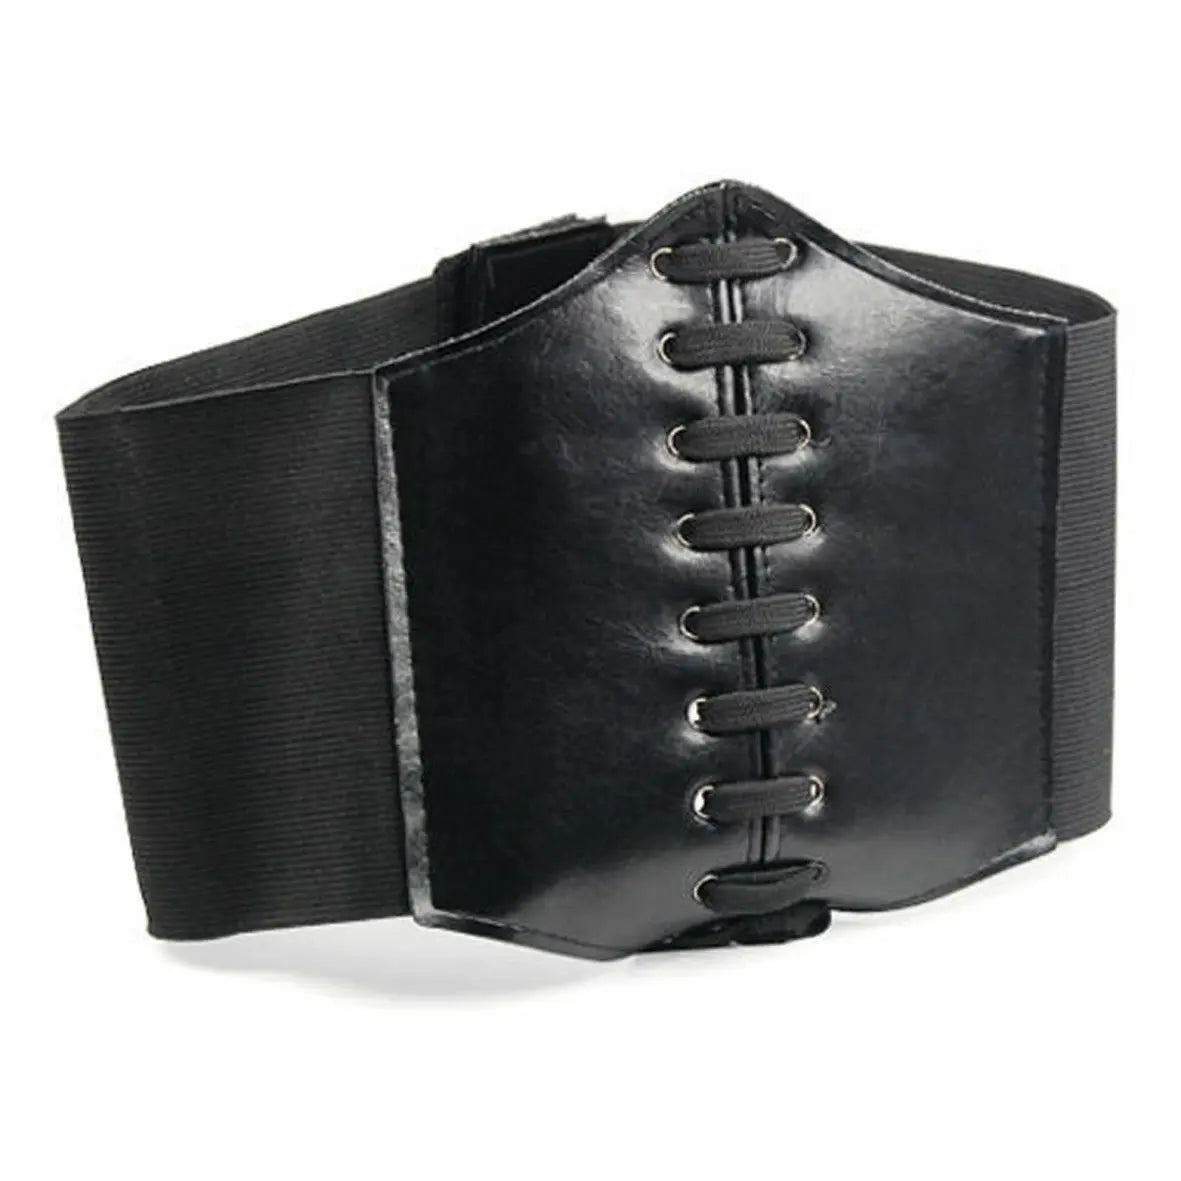 LEATHER-look WAIST CLINCHER BELT WIDE BAND ELASTIC TIED WASPIE CORSET BLACK UK Unbranded